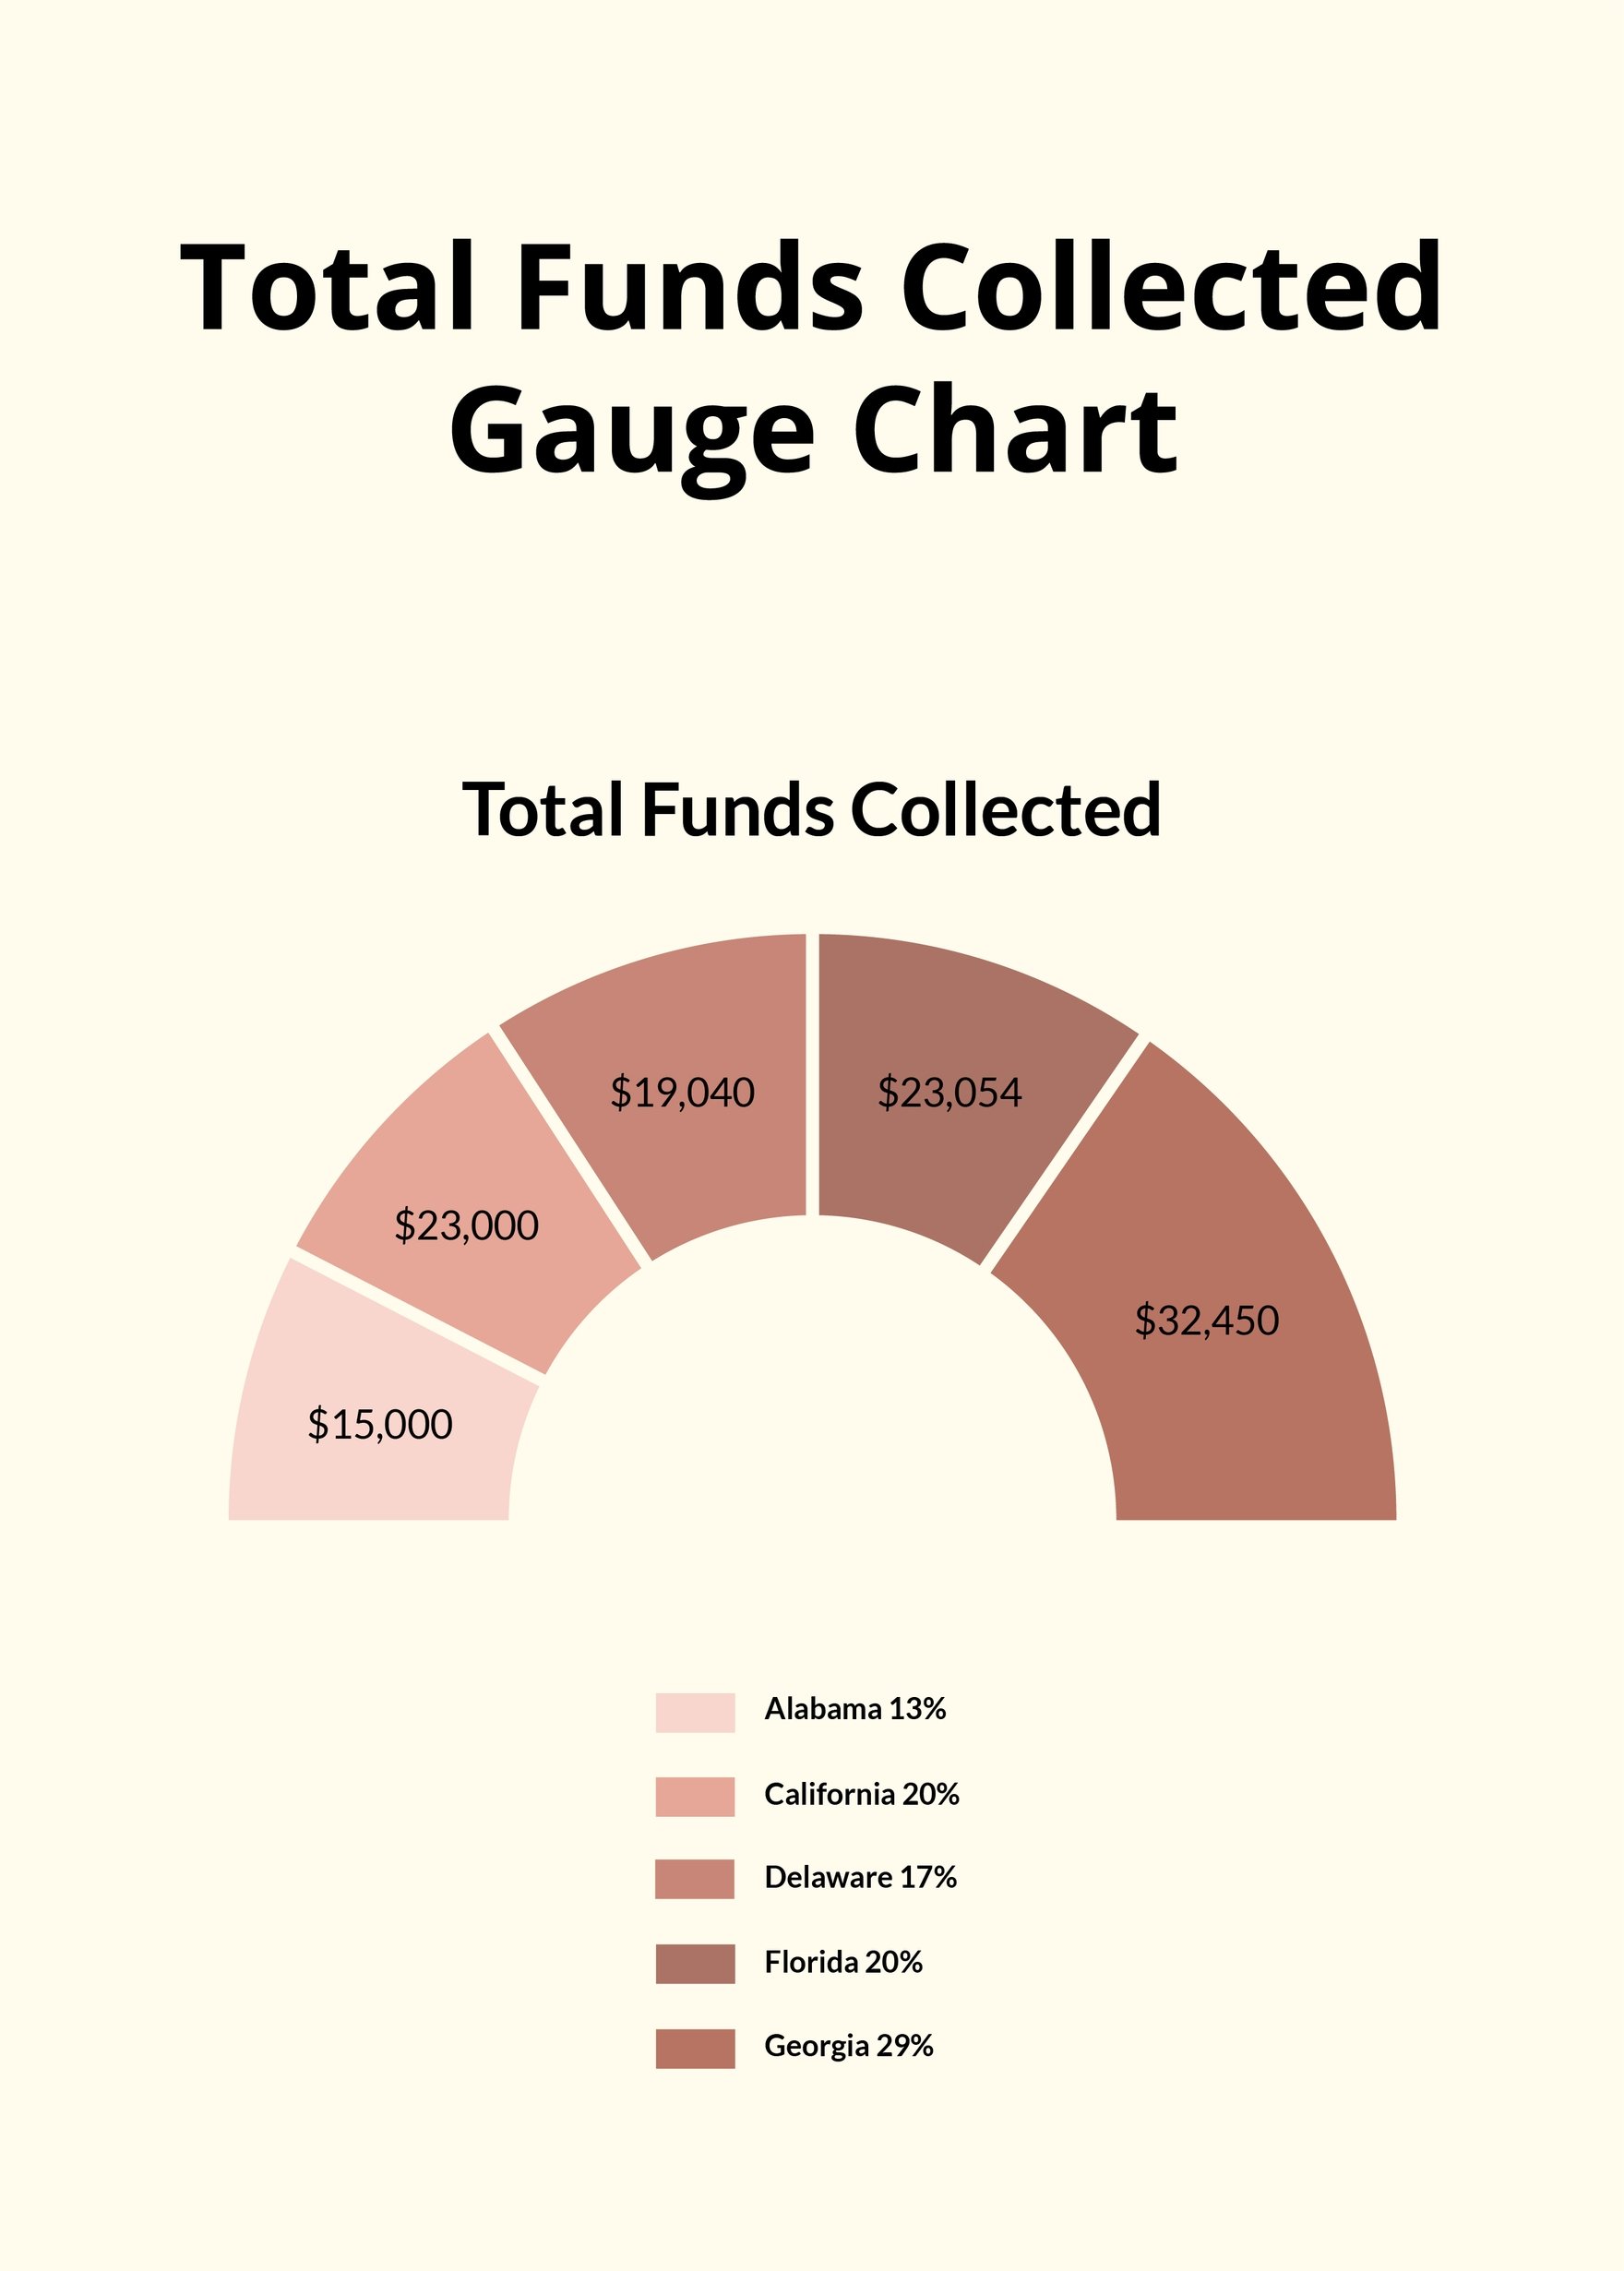 Total Funds Collected Gauge Chart